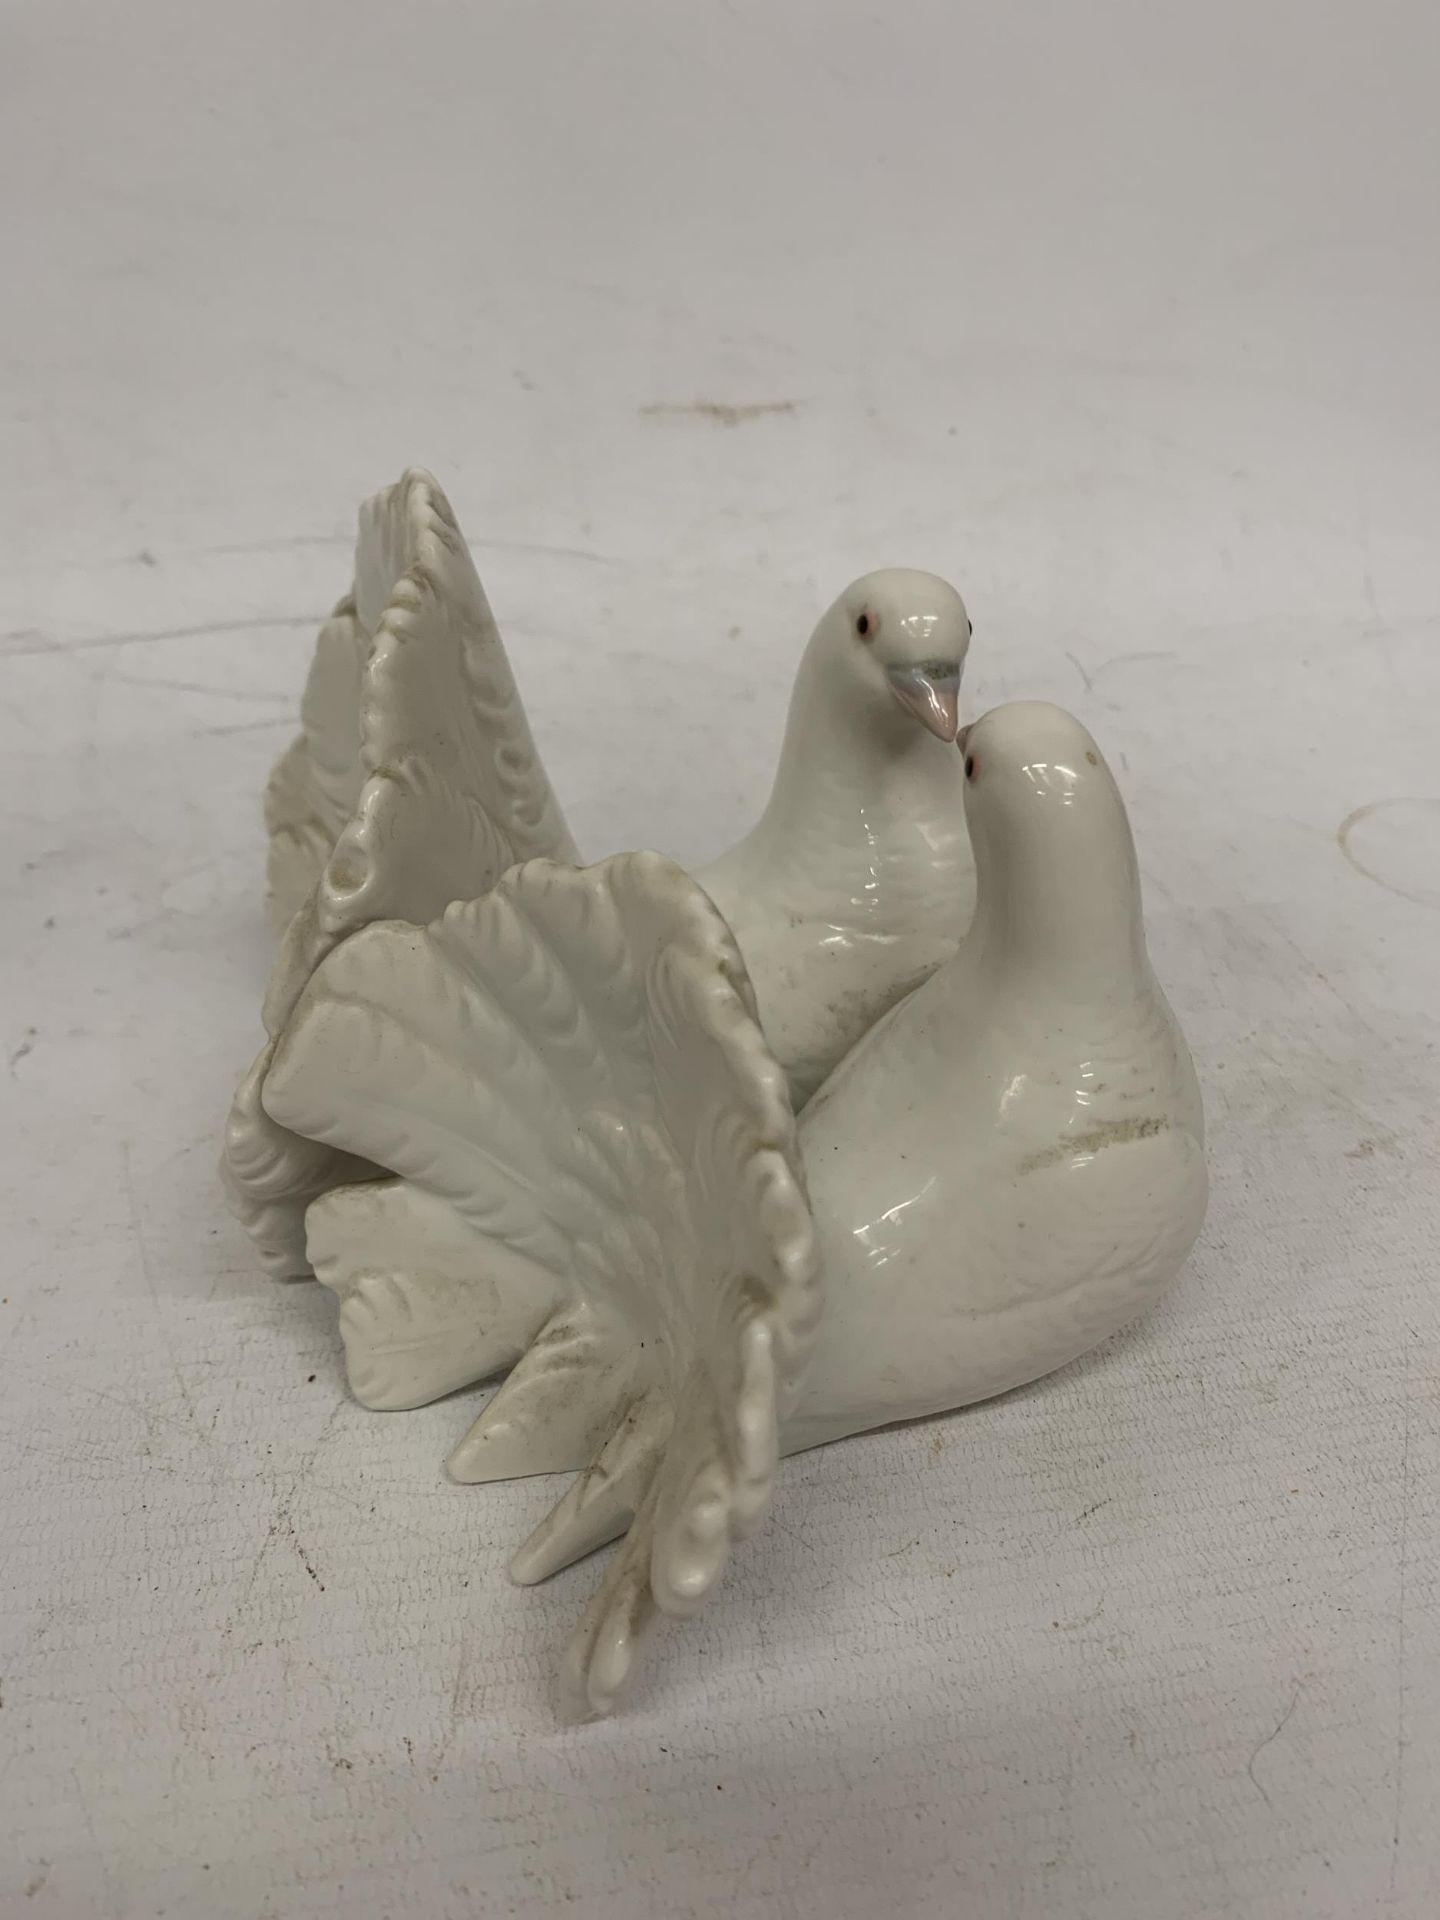 A LADRO COUPLE OF DOVES FIGURE - Image 2 of 3